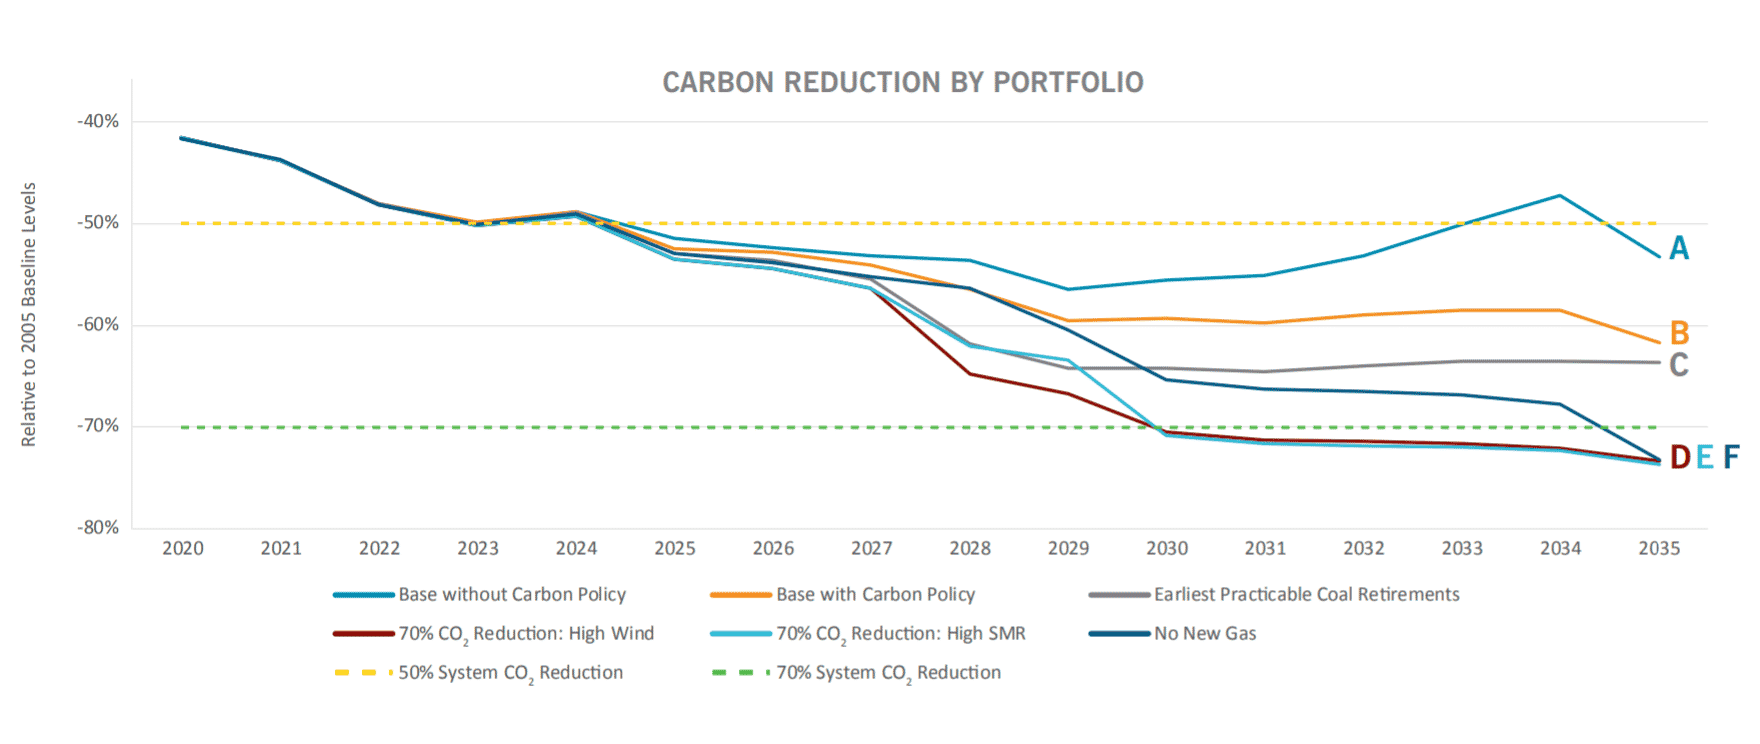 Resource Plan for Carolinas Examines Options to Accelerate Coal Plant Retirements